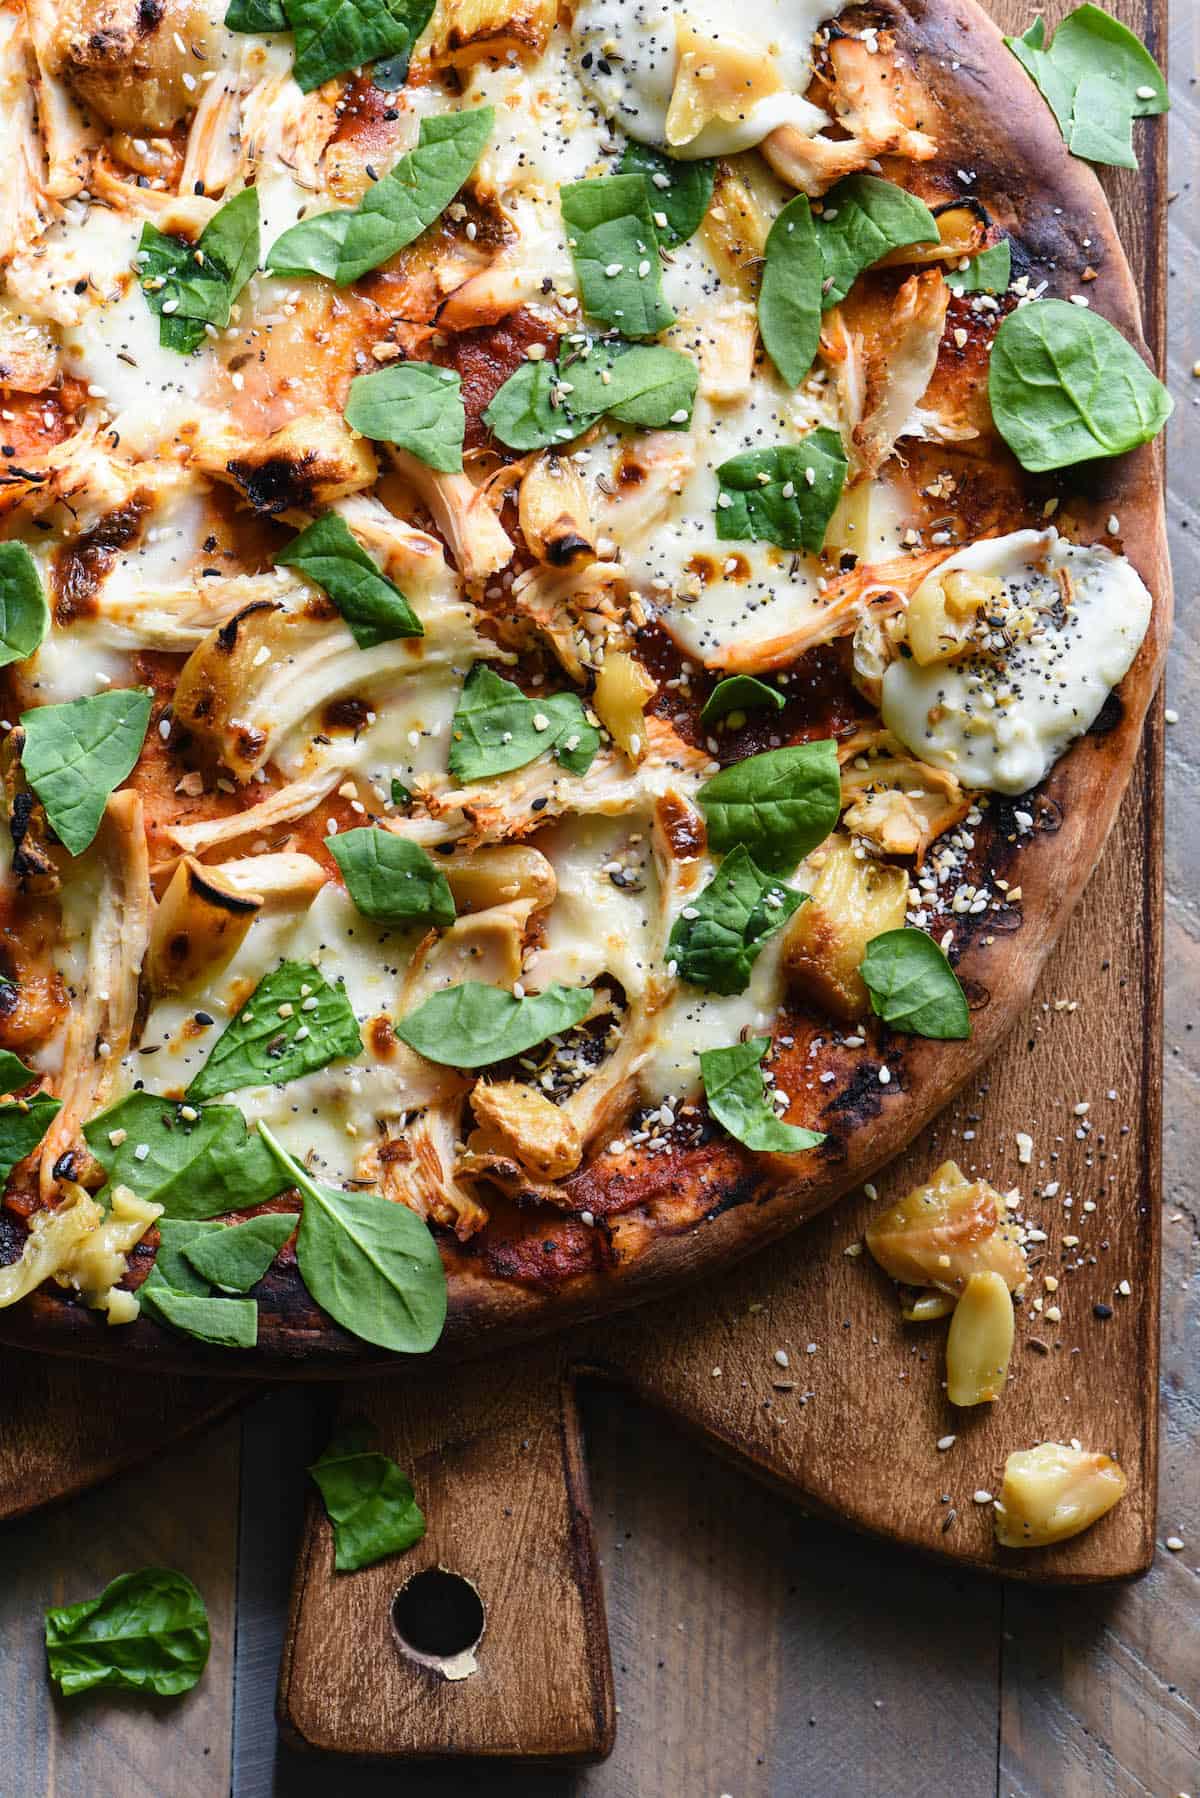 Pizza topped with mozzarella, chicken, roasted garlic and spinach, on wooden cutting board.